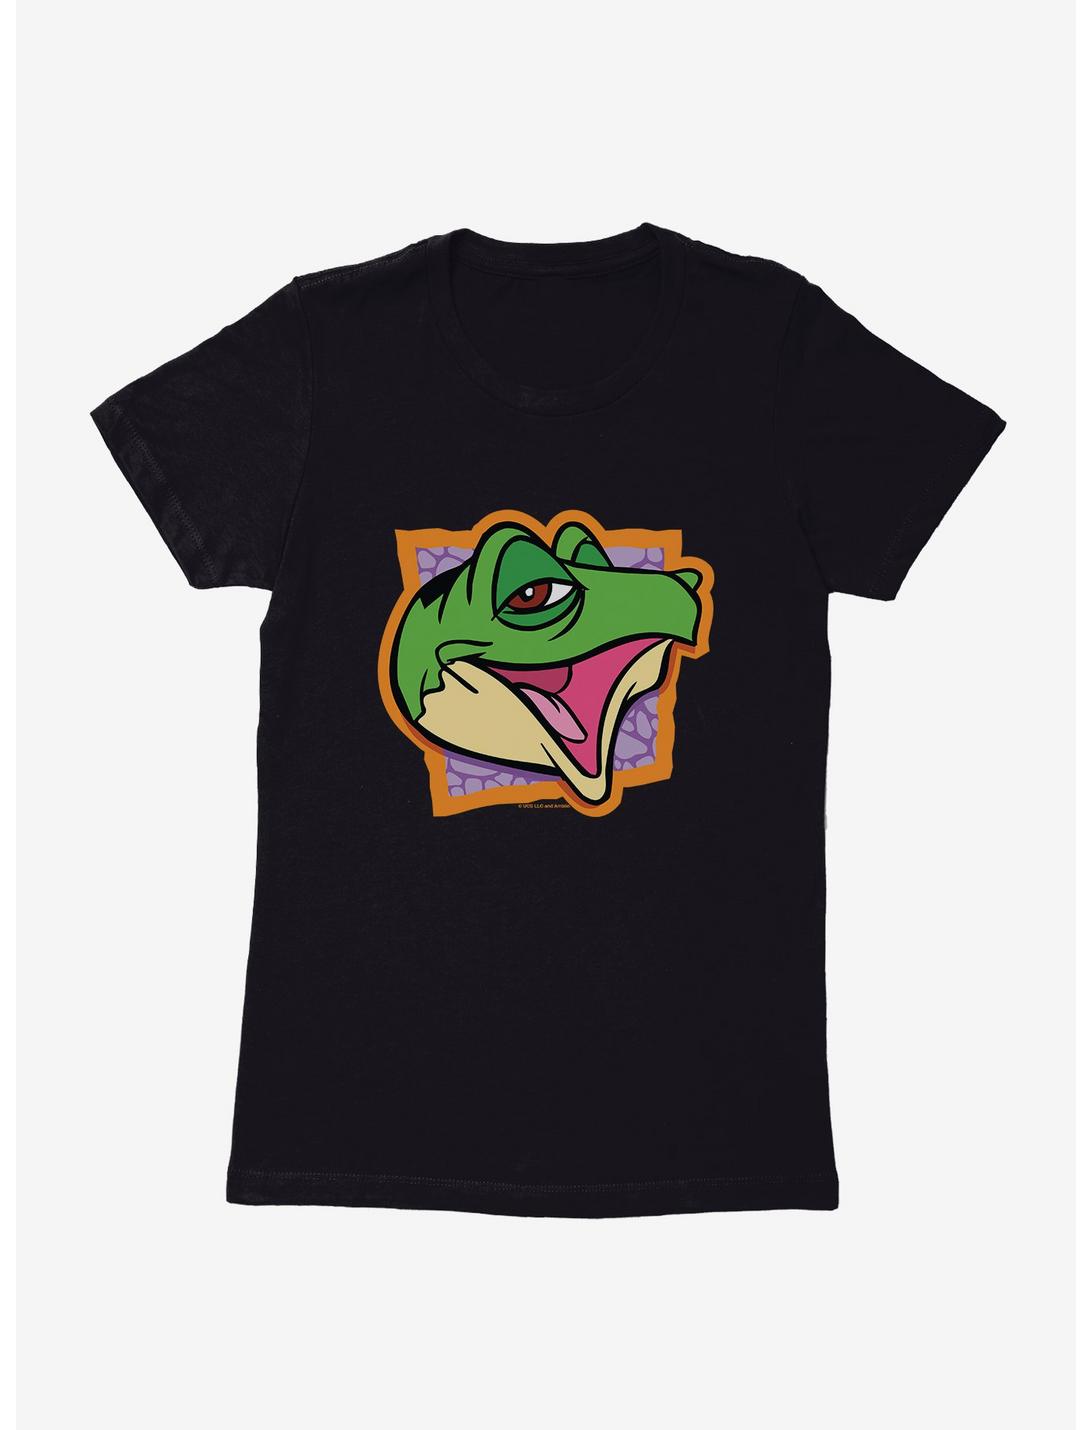 The Land Before Time Spike Square Womens T-Shirt, BLACK, hi-res